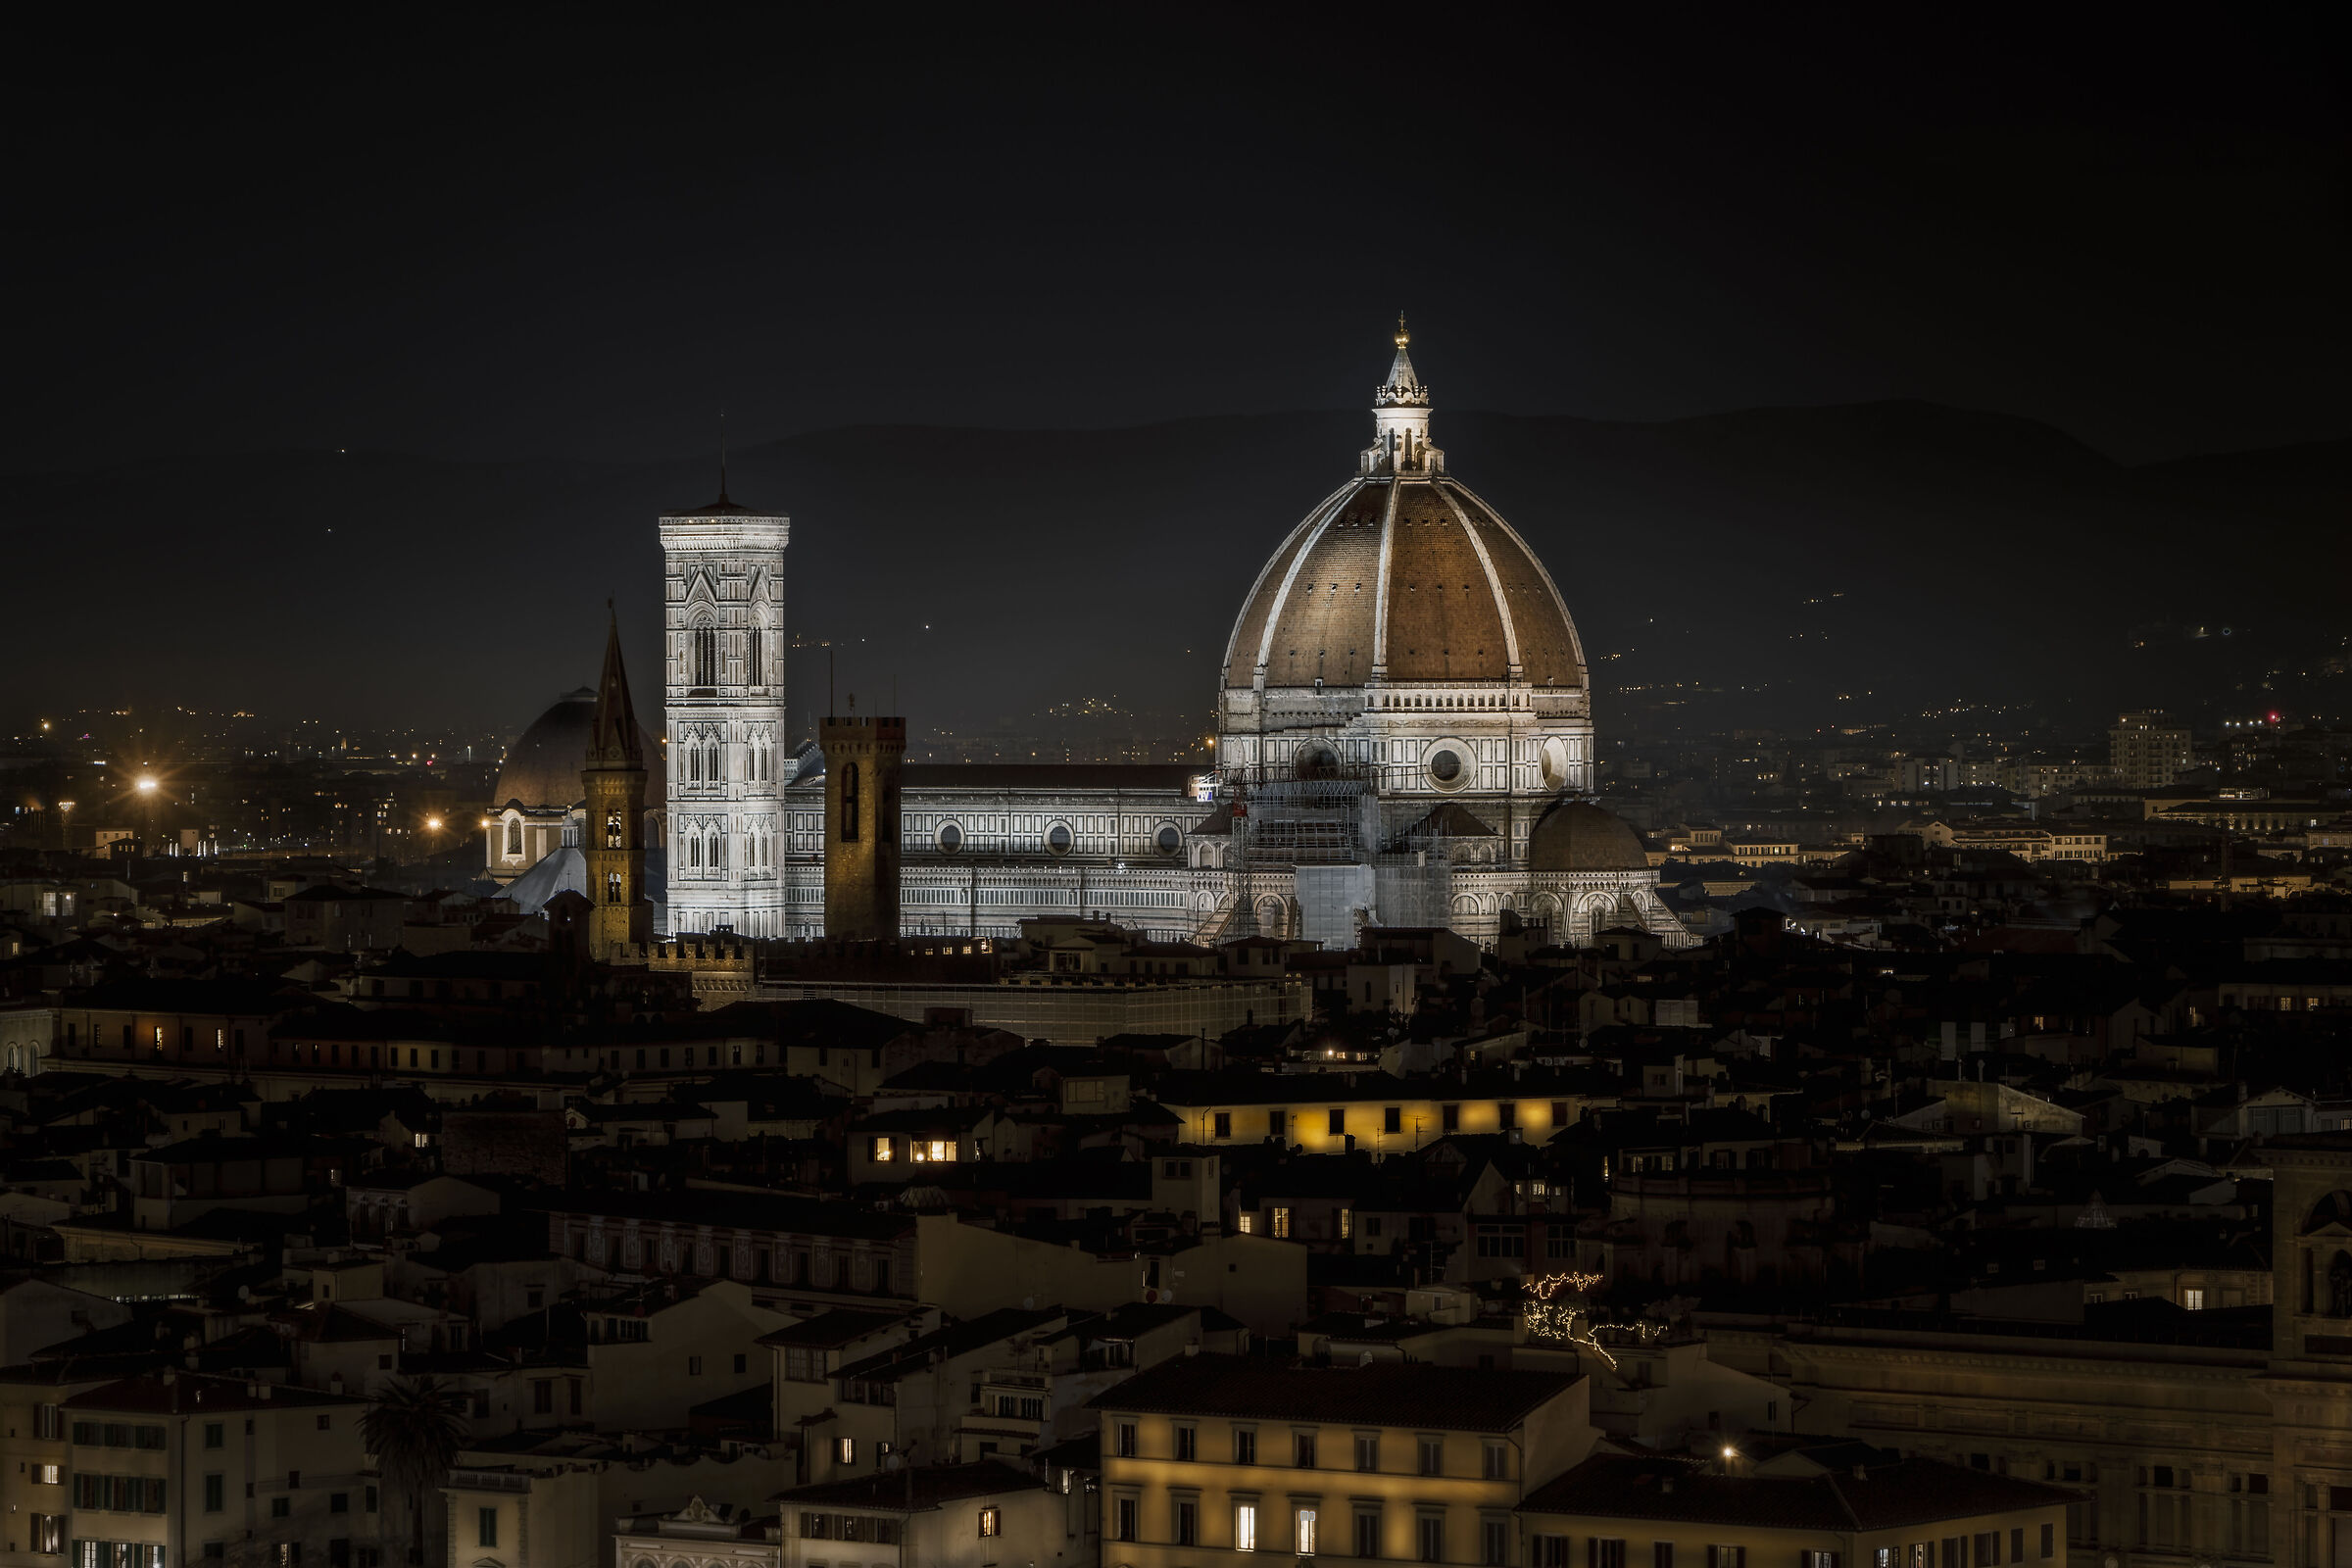 The Dome of Florence...